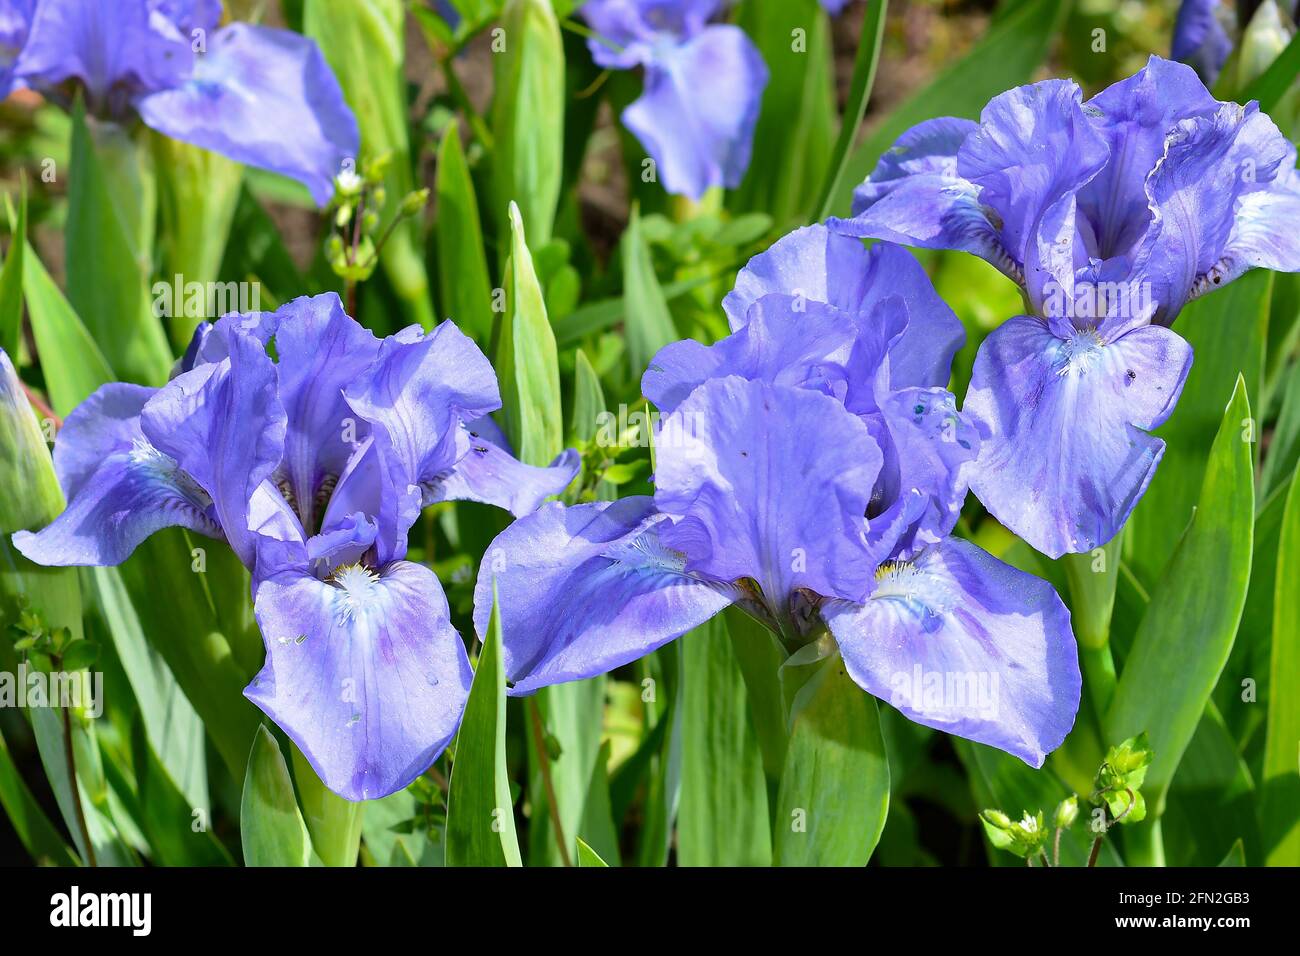 Beautiful colorful large purple iris flowers growing in a meadow in the garden. Stock Photo